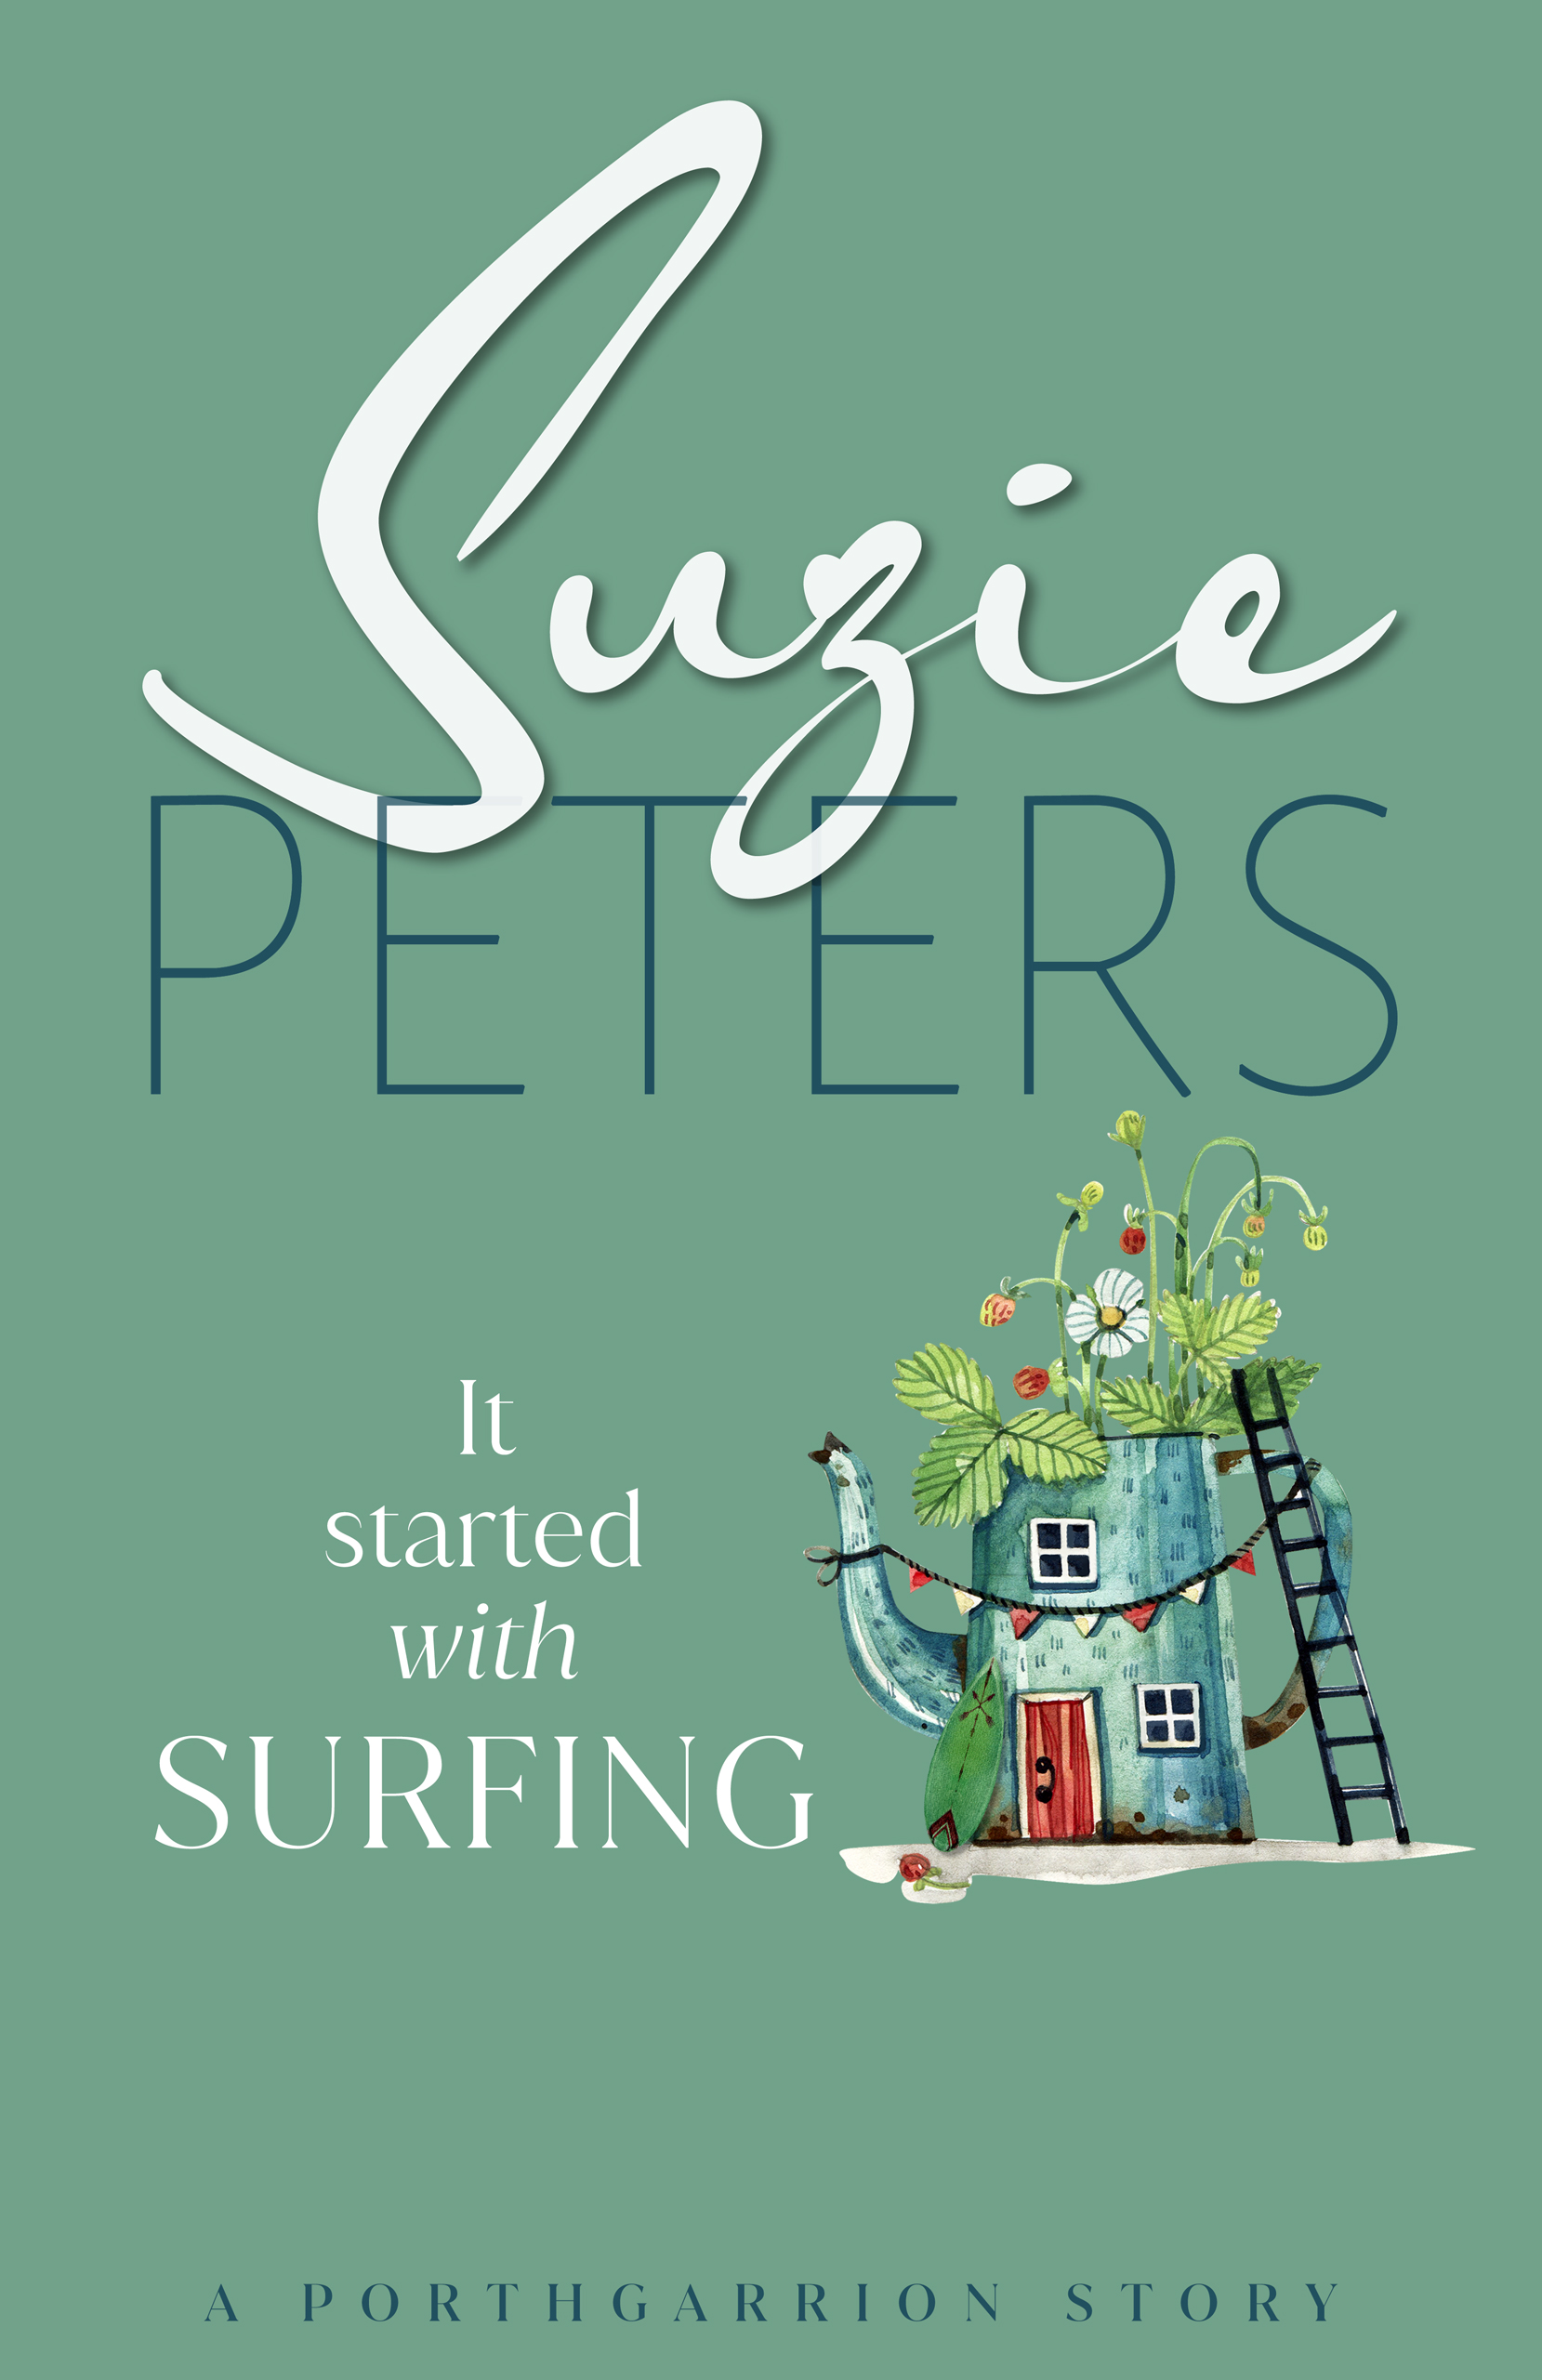 Porthgarrion Series: It Started with Surfing by Suzie Peters.